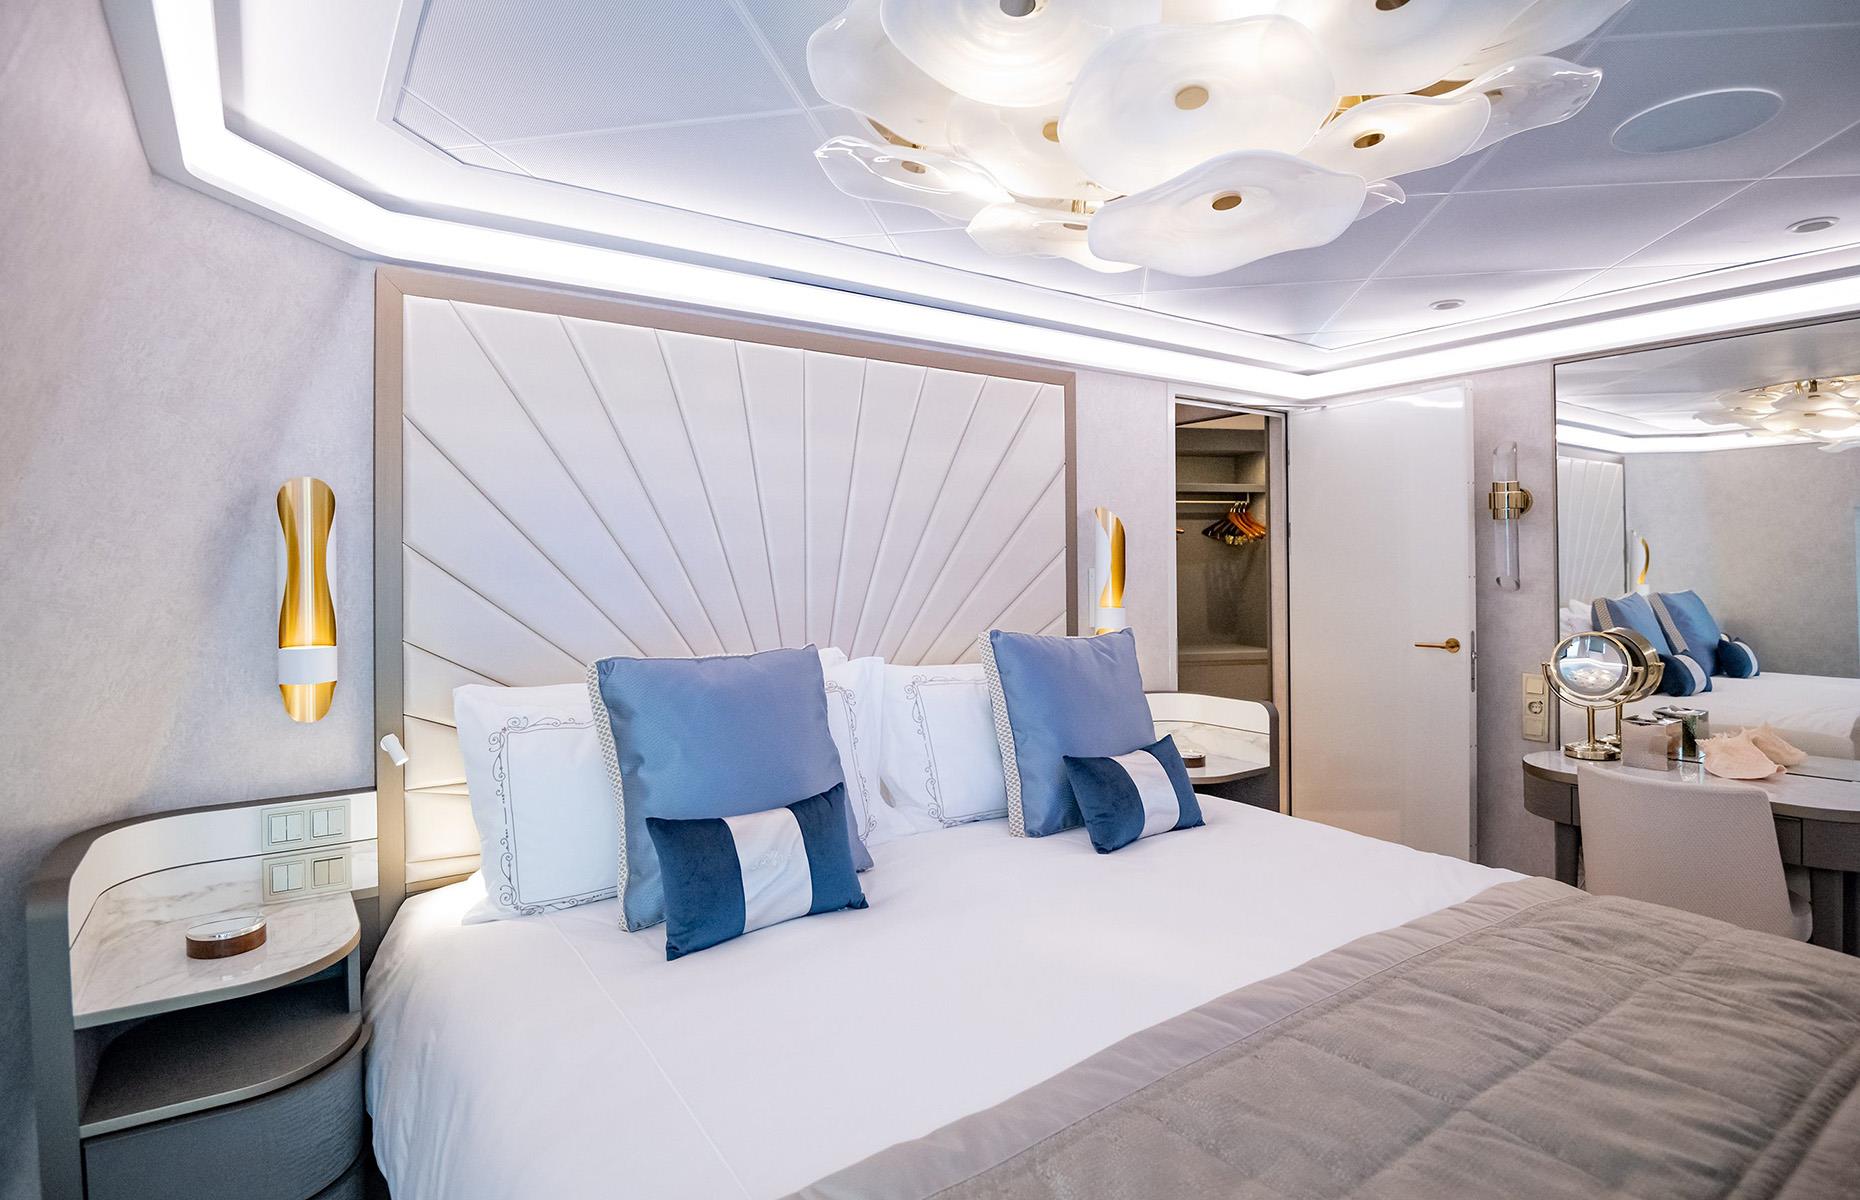 <p>The 1,966-square-foot (182sqm) suite has two main bedrooms, one children's room and a library that can double up as a bedroom if needed – each one has its own bathroom. Disney Wish runs multiple three- and four-night cruises around the Bahamas in 2024. Prices for the Tower Suite costs from around £10,800 ($13.6k) per adult and £2,600 ($3.3k) per child for a three-night sailing, before taxes and other charges.</p>  <p><strong>Liking this? Click on the Follow button above for more great stories from loveEXPLORING</strong></p>